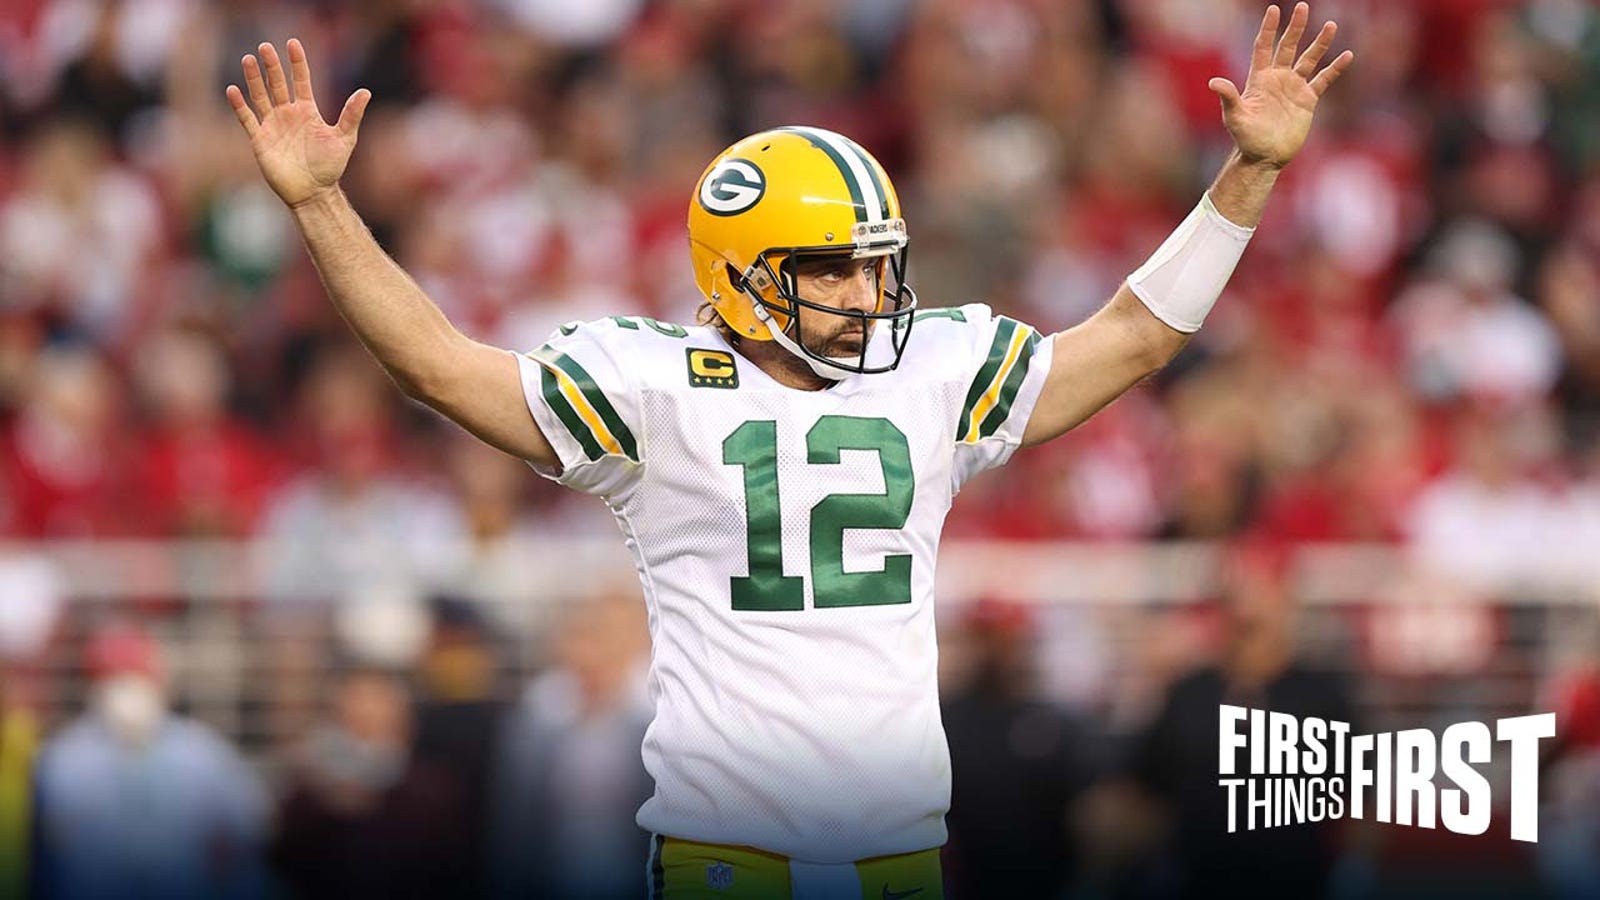 Chris Broussard: Aaron Rodgers is back after Packers' thrilling win over 49ers I FIRST THINGS FIRST